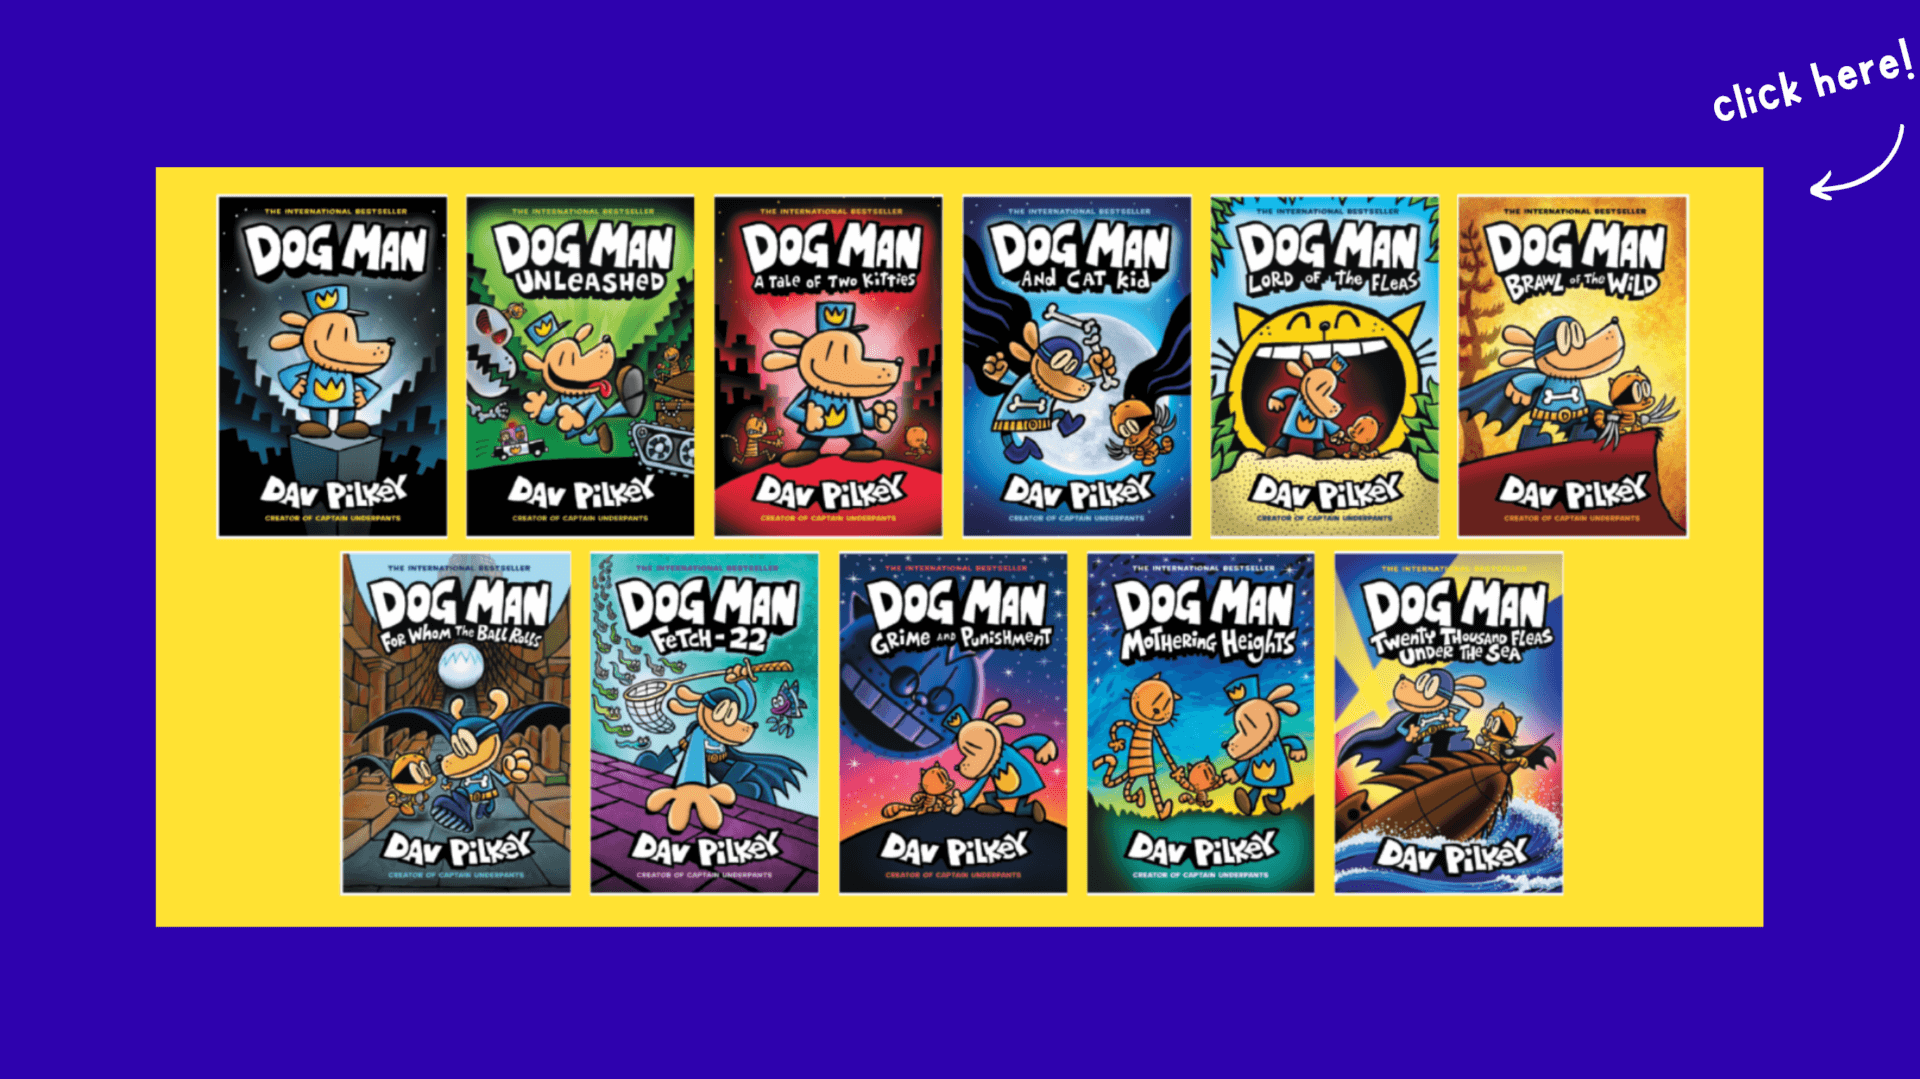 Learn more about the award-winning Dog Man series of books by David Pilkey! Click Here!